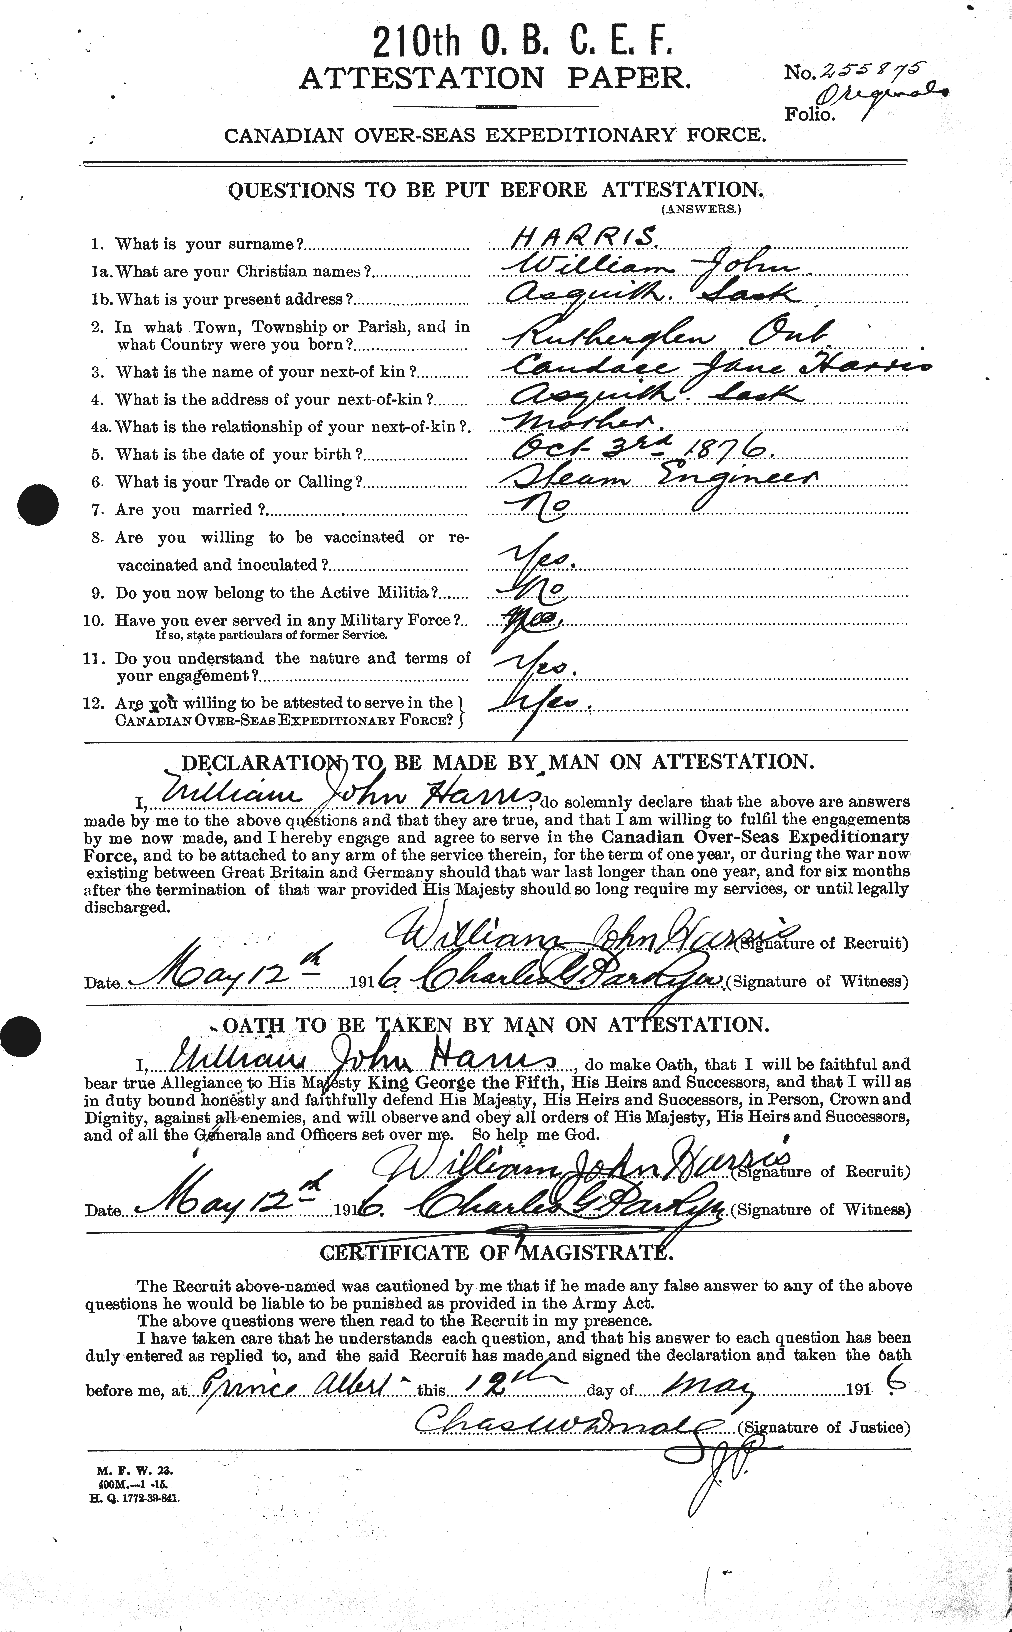 Personnel Records of the First World War - CEF 380164a